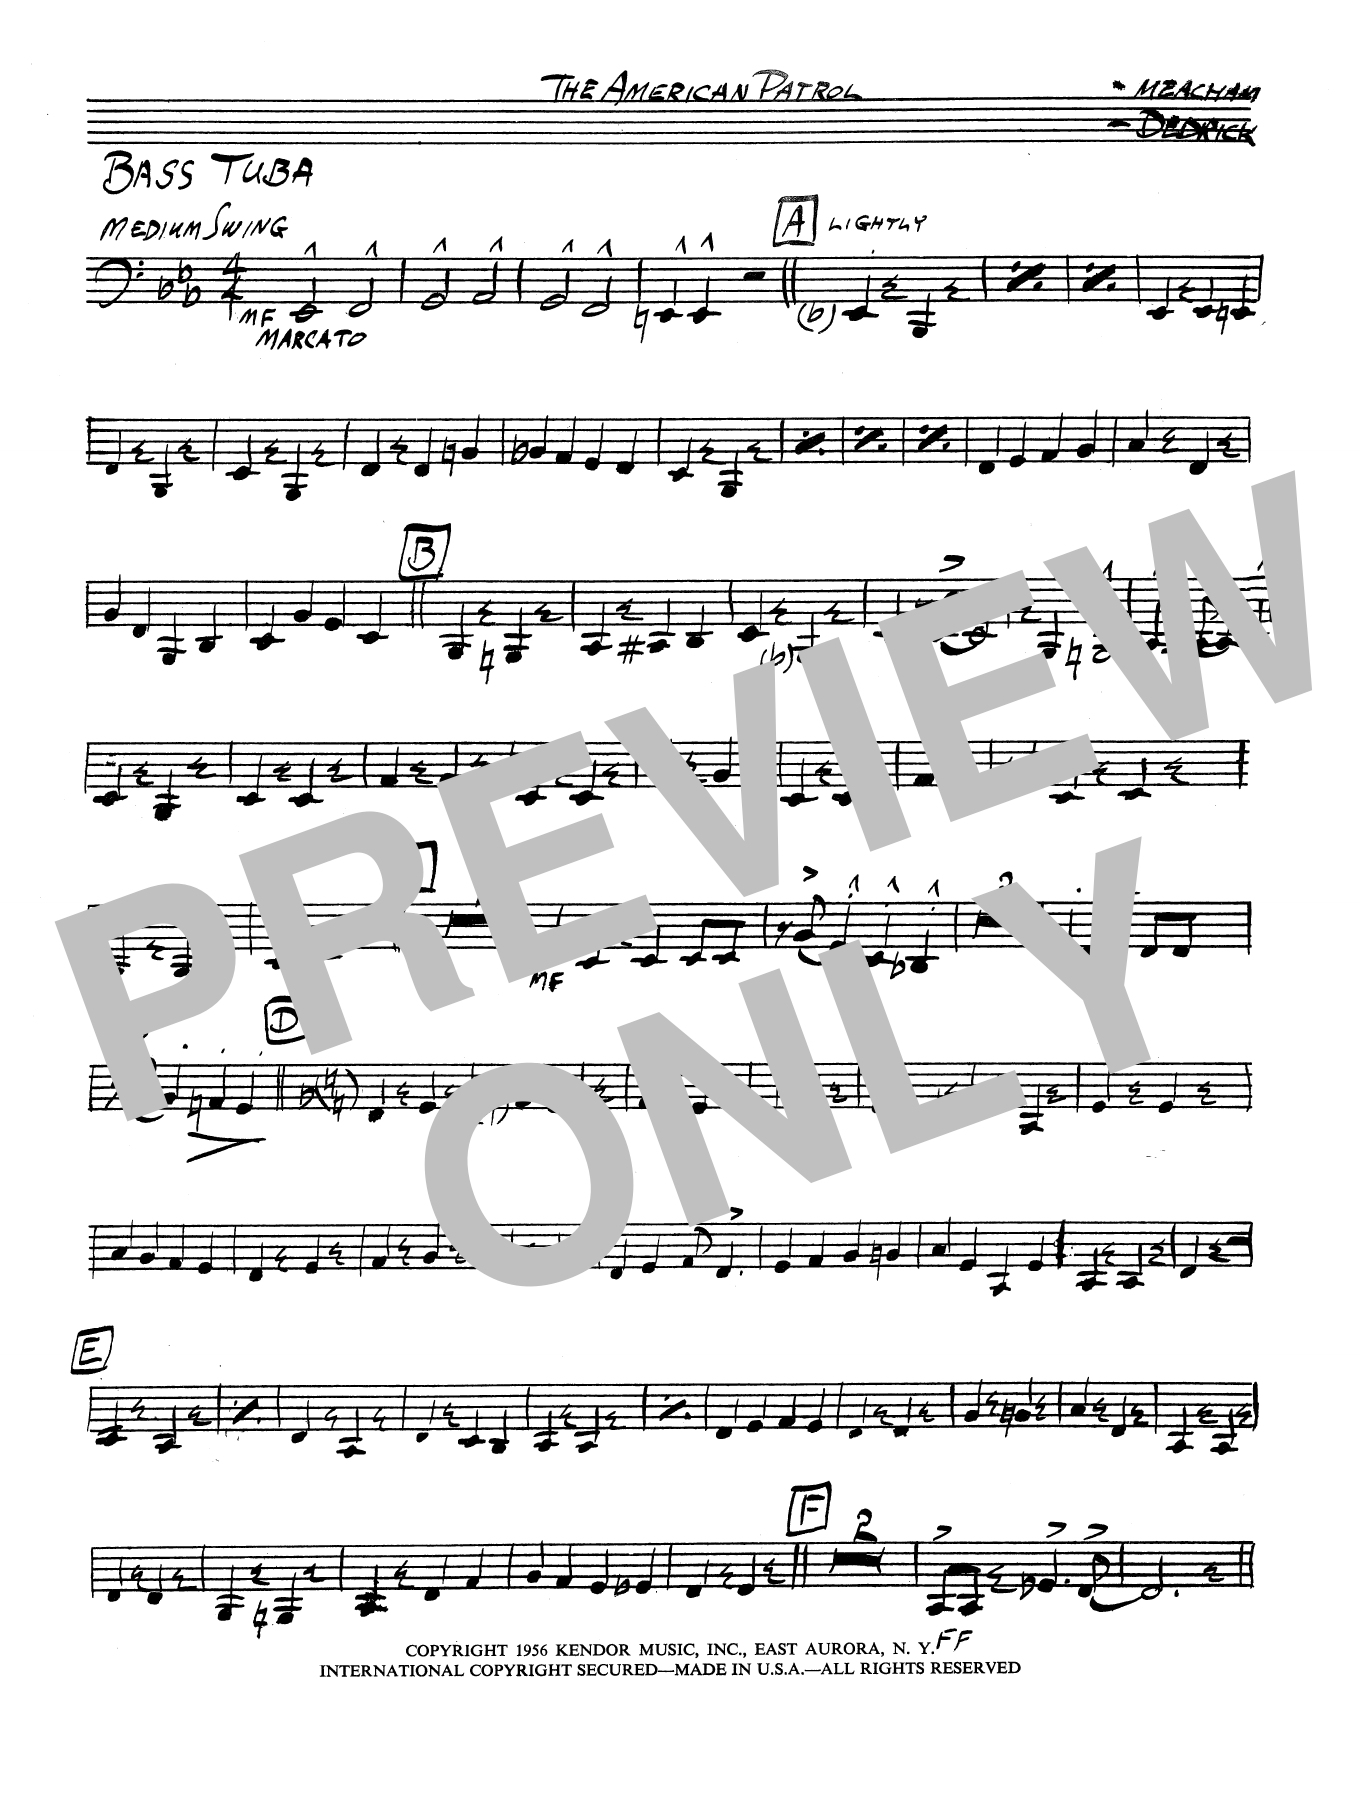 Art Dedrick American Patrol - Tuba sheet music preview music notes and score for Jazz Ensemble including 1 page(s)